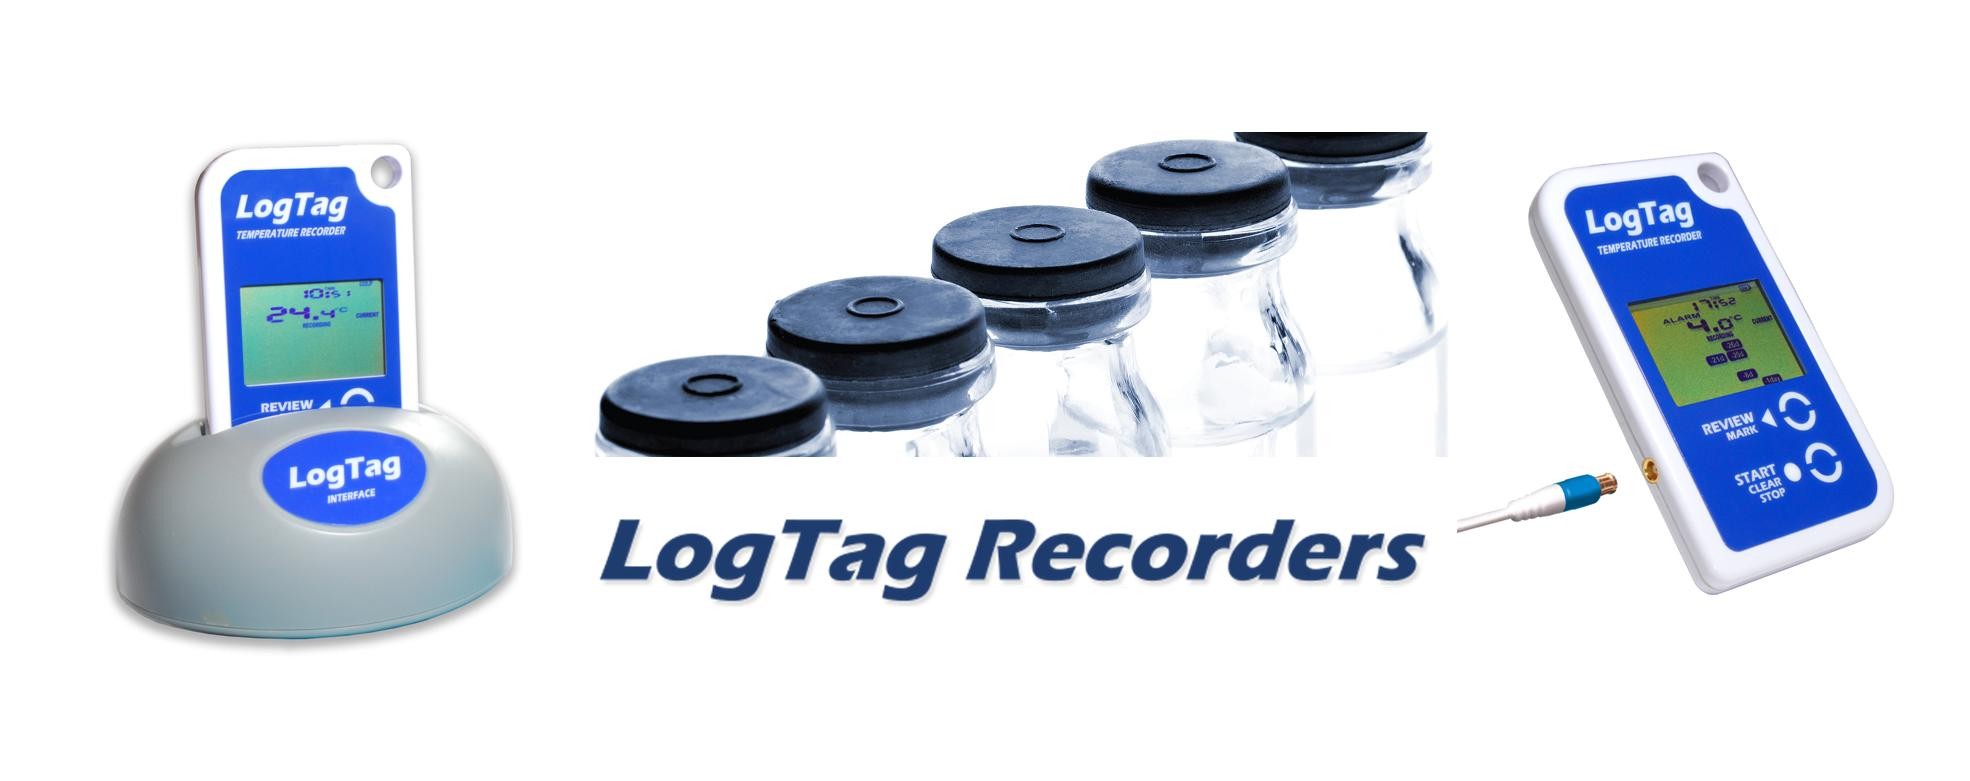 Logtag. Cold Chain Solutions.